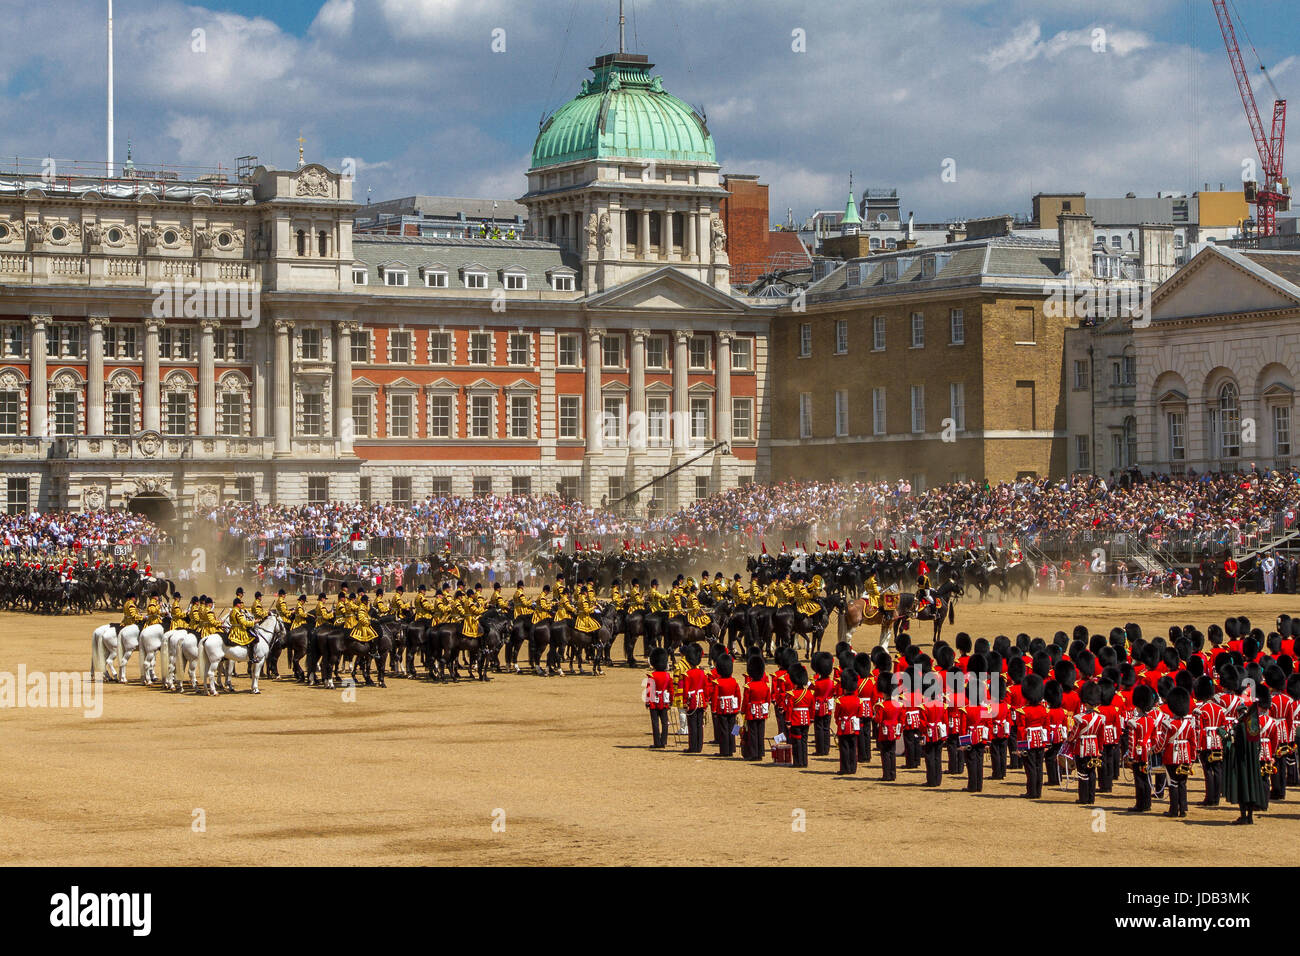 Trooping The Colour 2017.The Irish Guards Troop The Colour At The Queens Birthday Parade at Horse Guards Parade , London , June 2017 Stock Photo